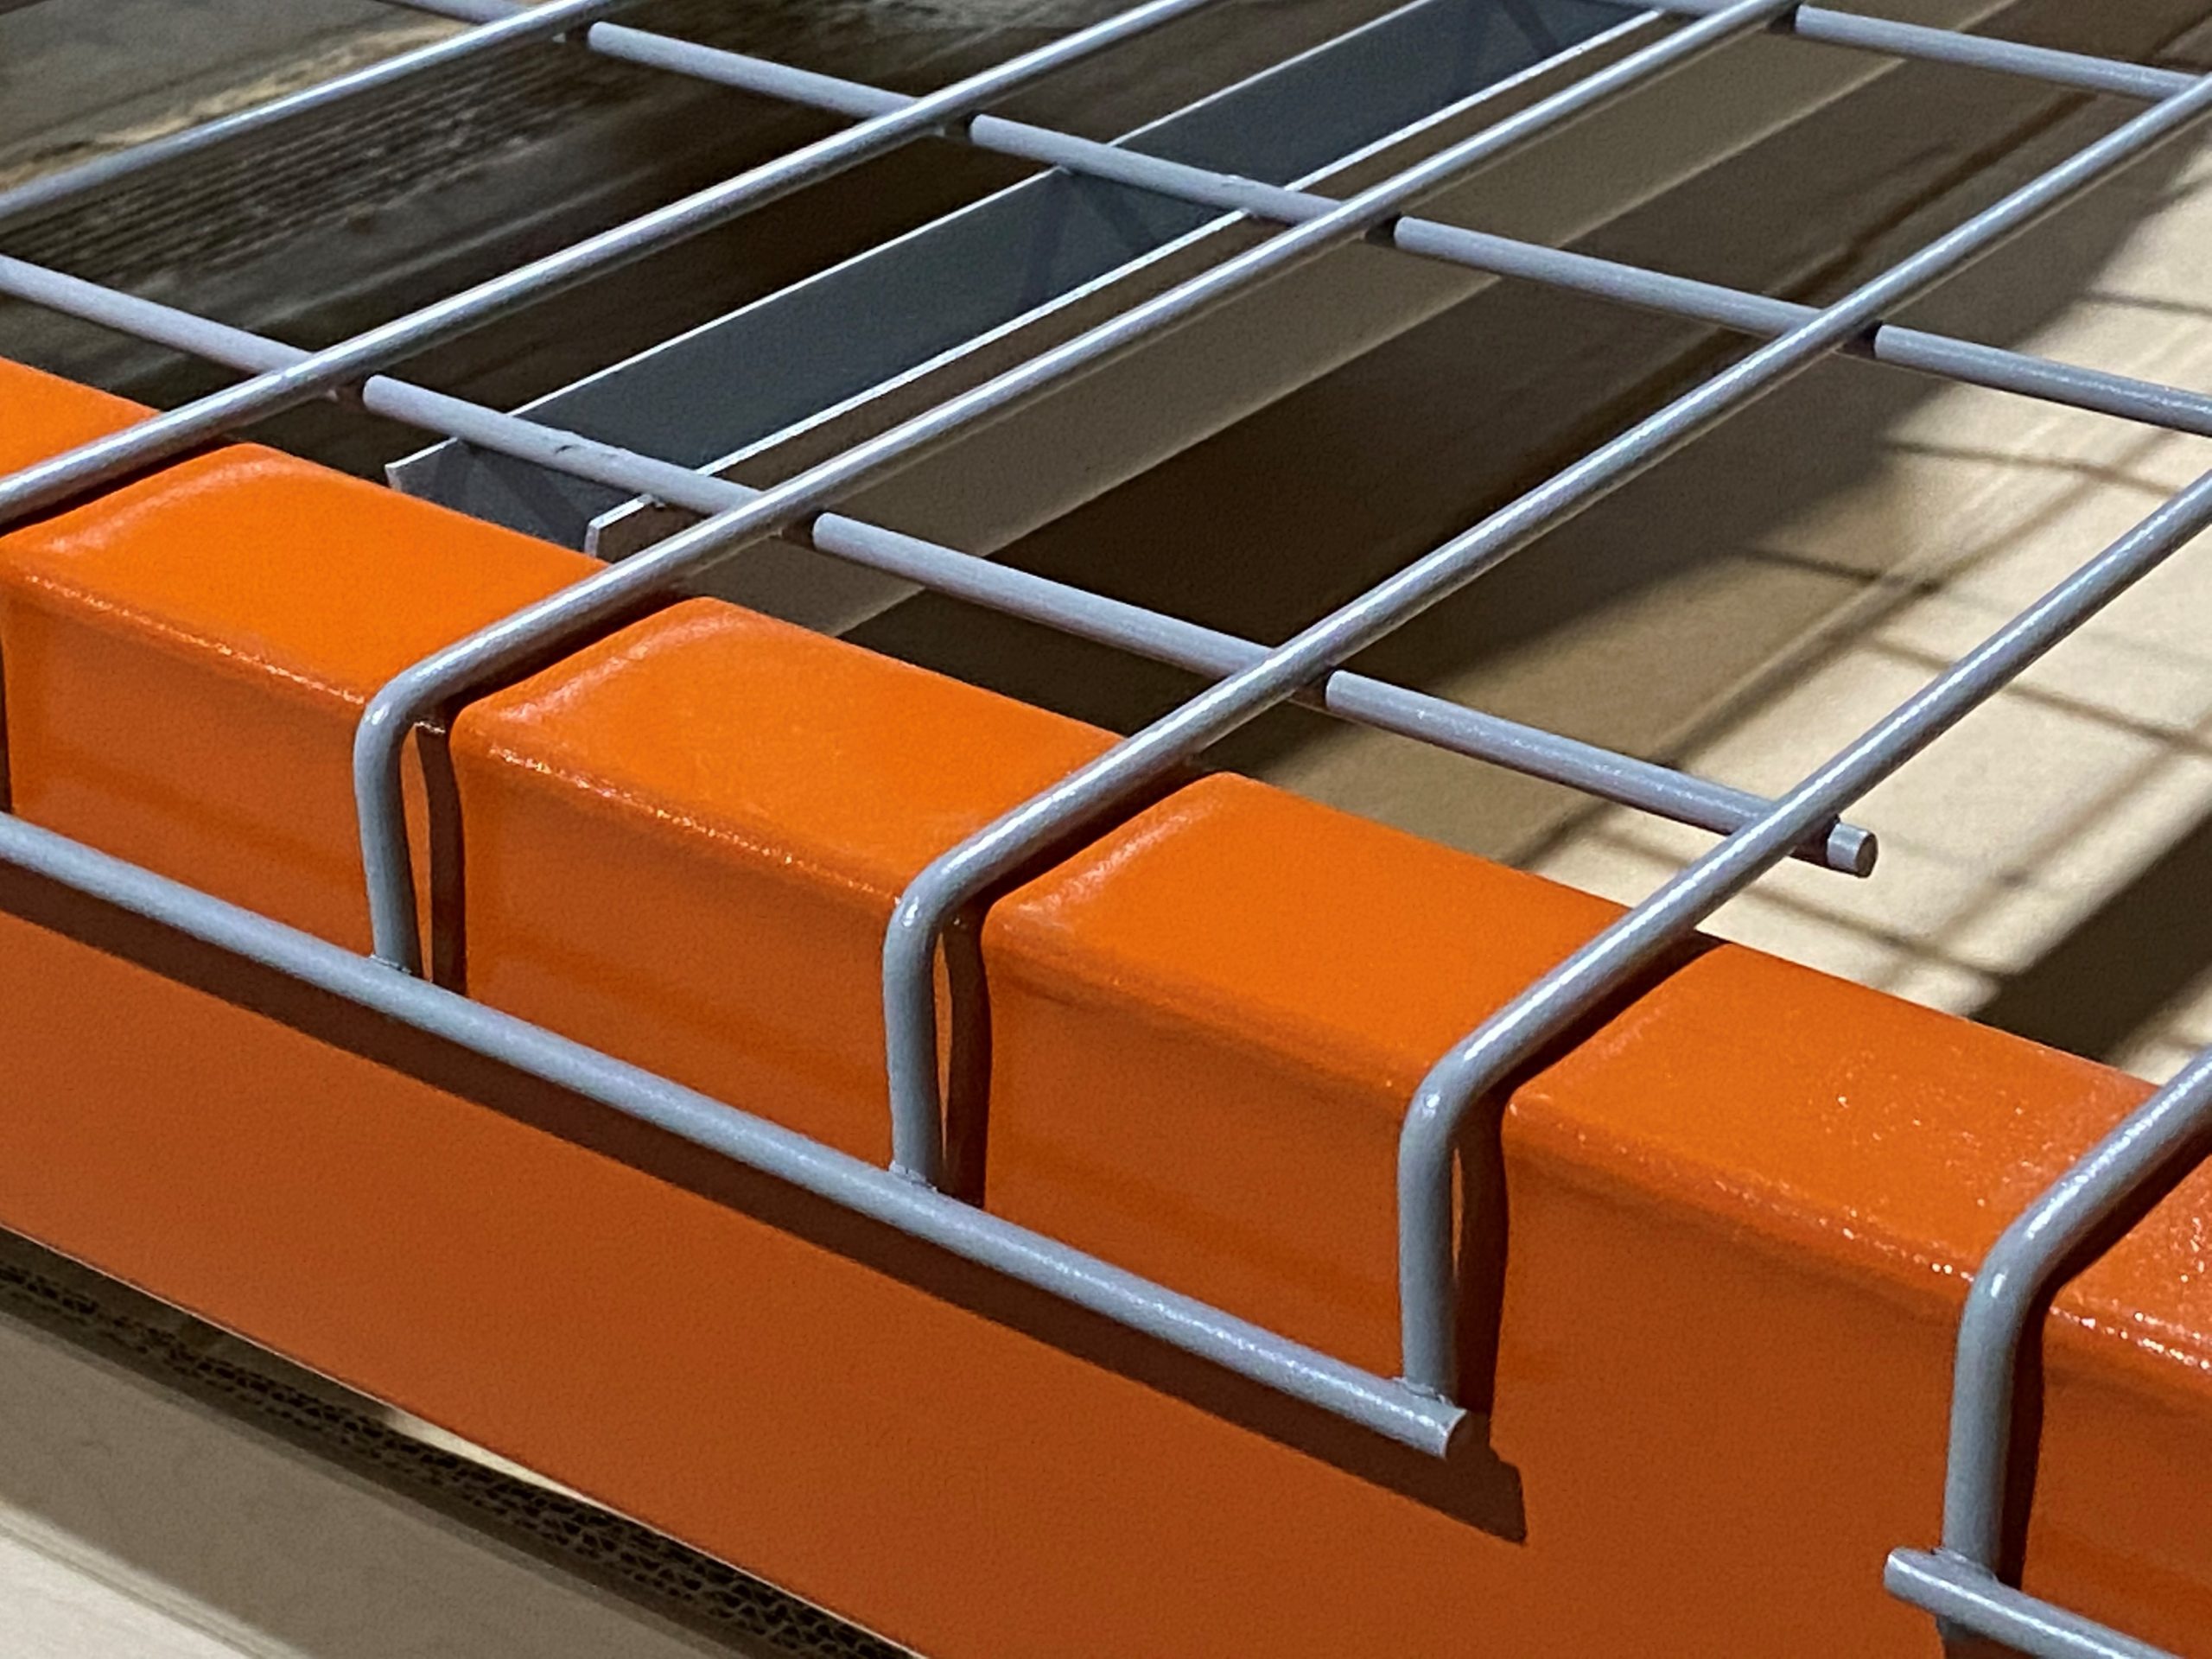 Benefits of Wire Mesh Decking - Warehouse Rack and Shelf